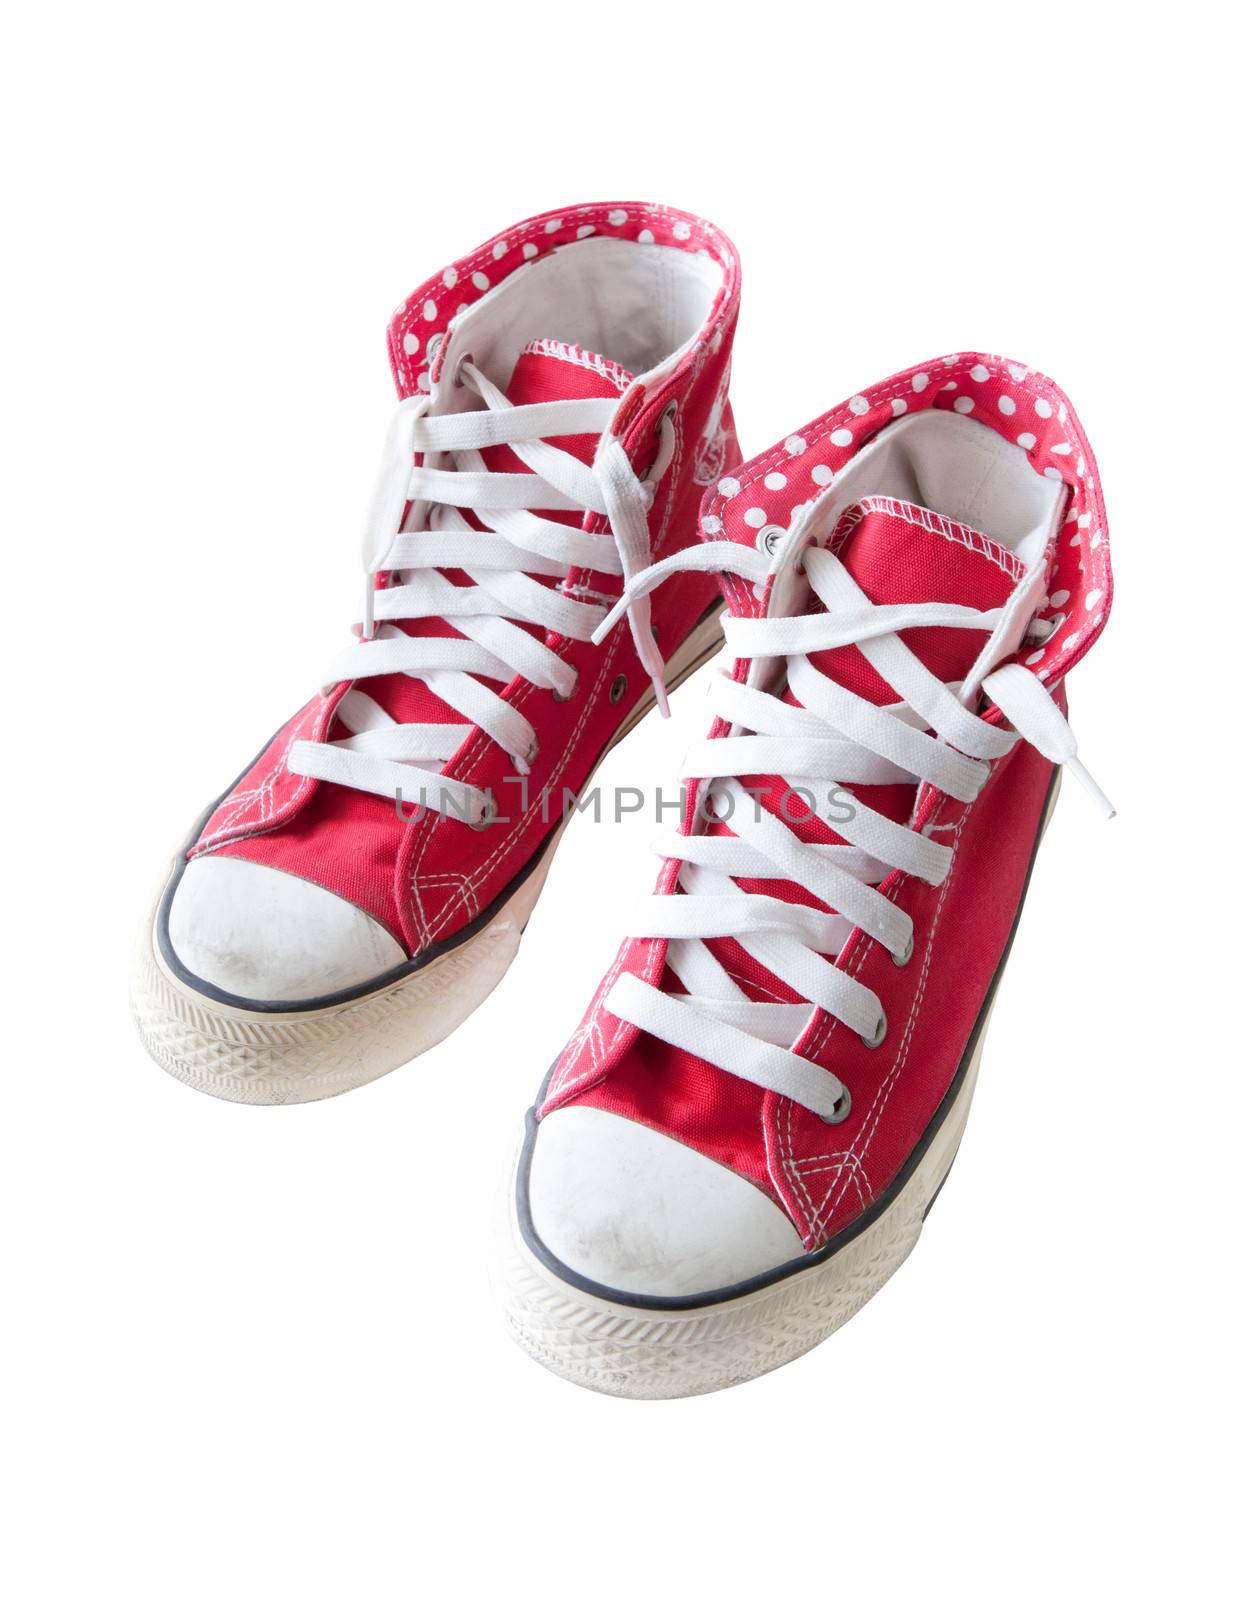 old red  sneaker shoes isolated white by khunaspix